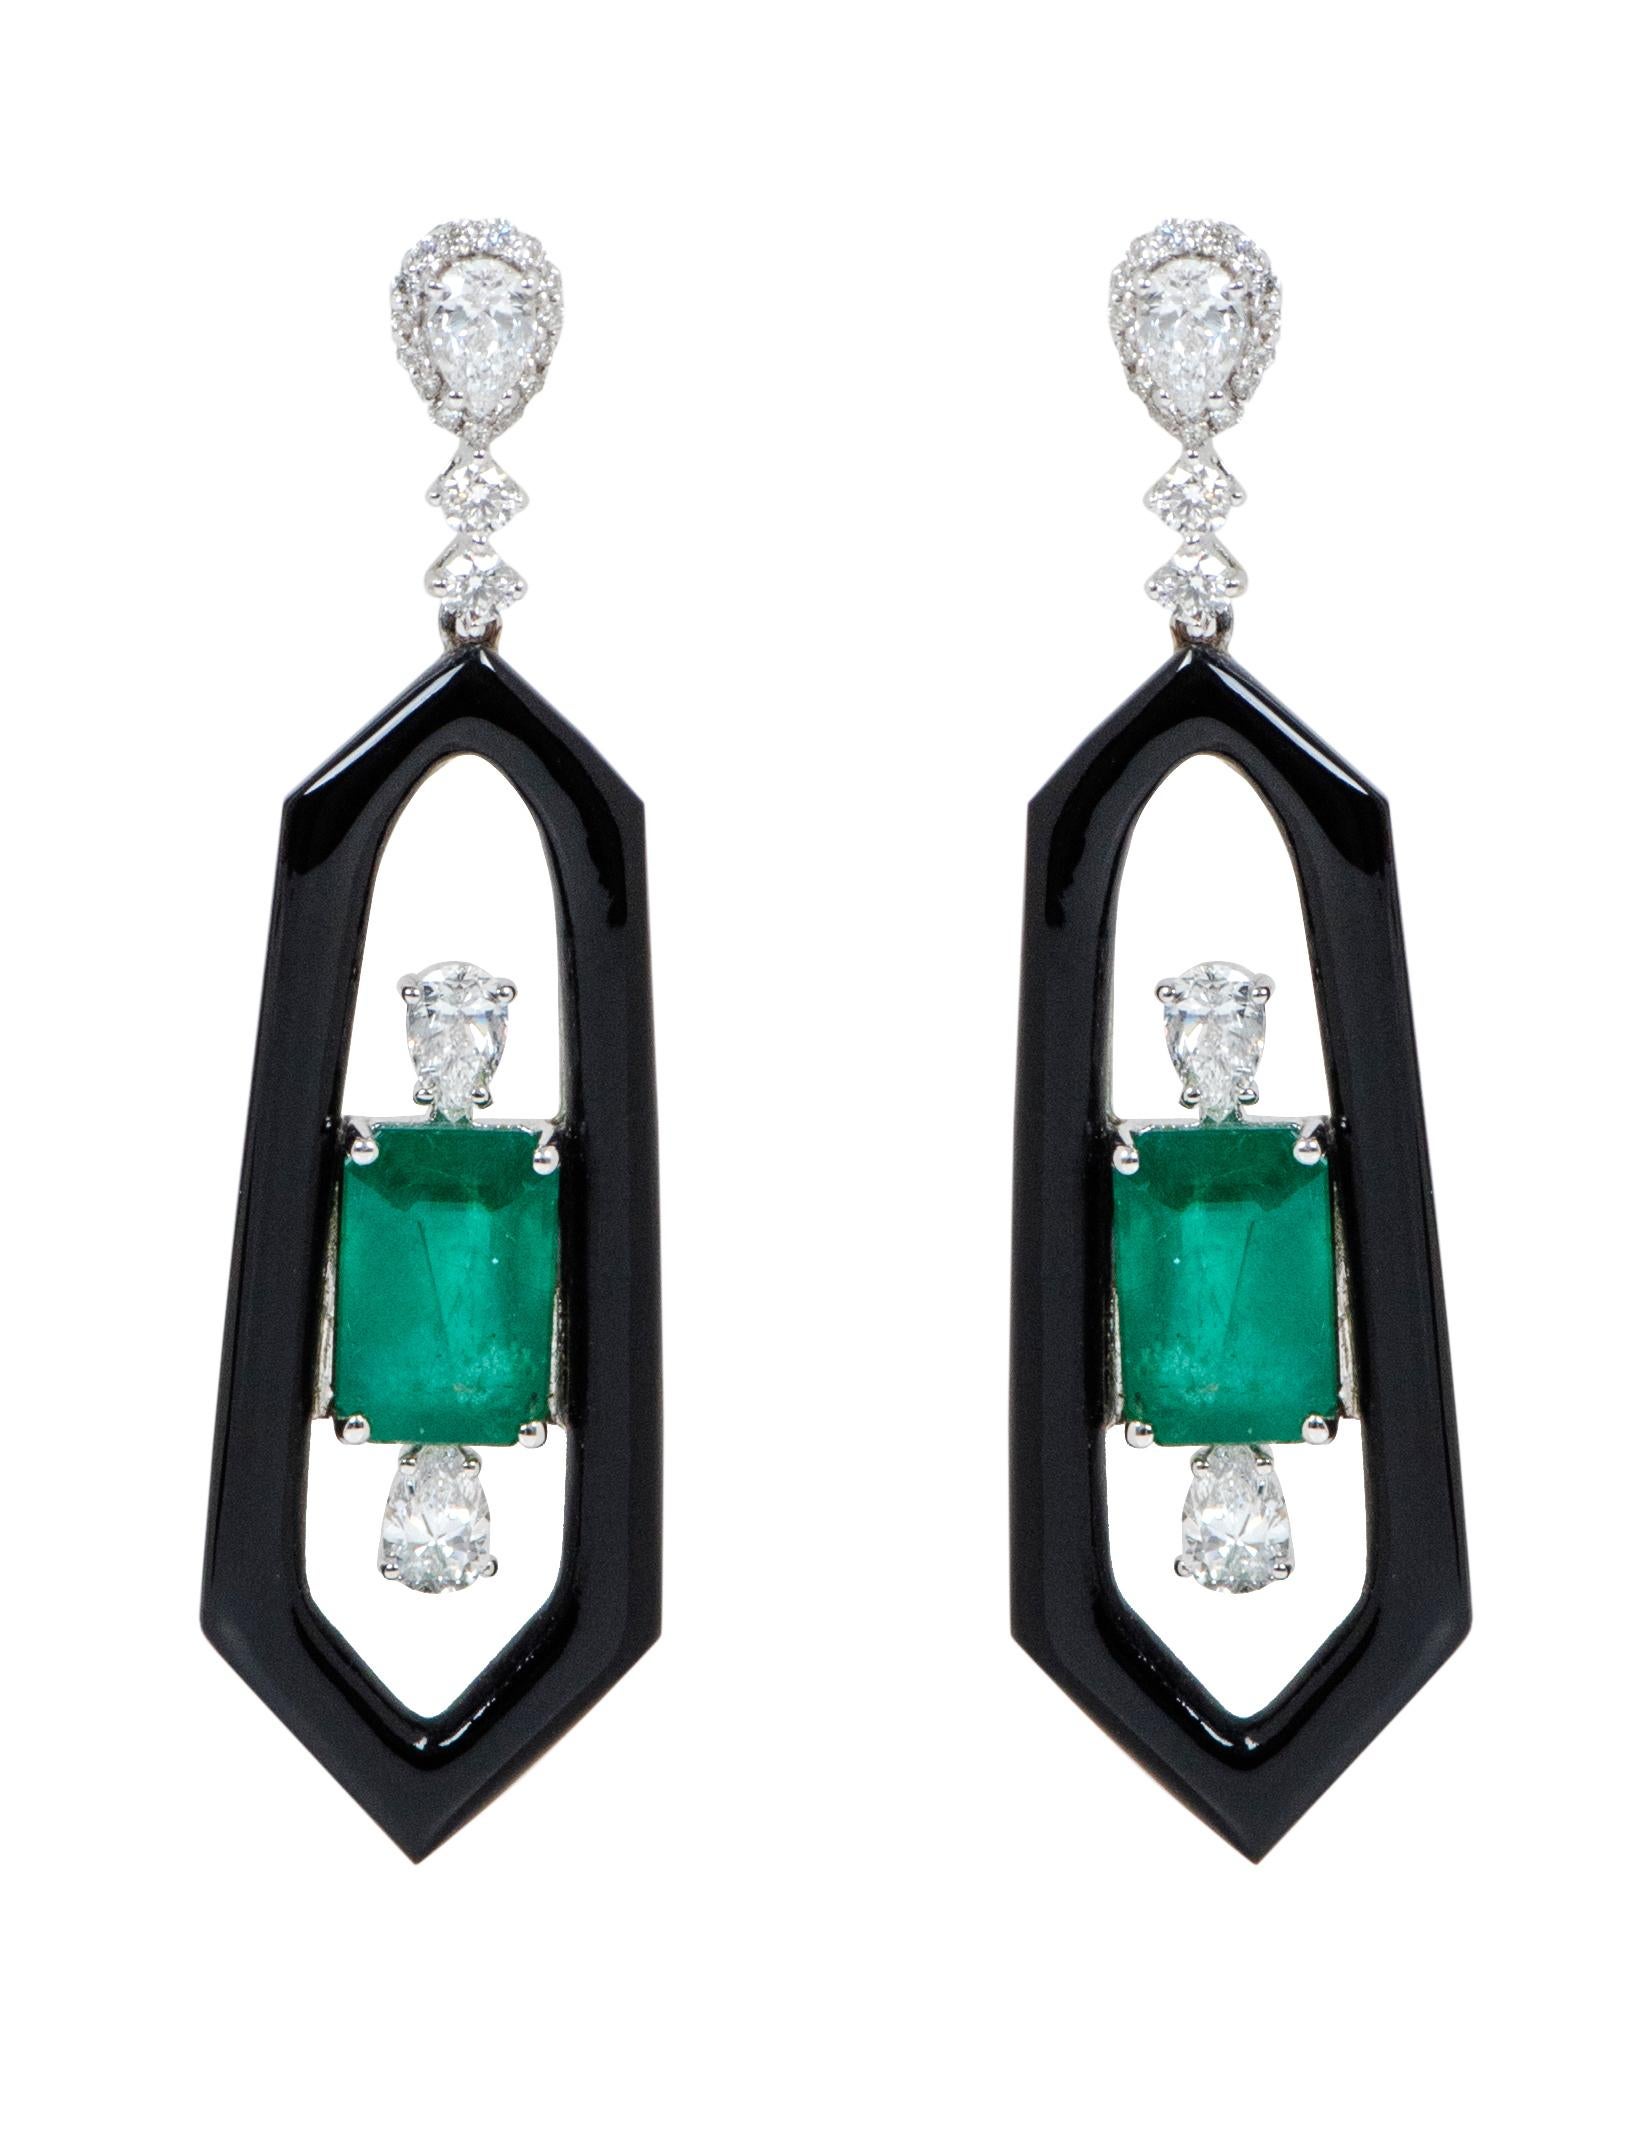 18 Karat White Gold Natural Emerald, Diamond, and Black Onyx Dangle Earrings

This impeccable contemporary dark green emerald and diamond earring pair is exceptional. The emerald cut emerald in the center is exemplified with a solitaire pear-shaped